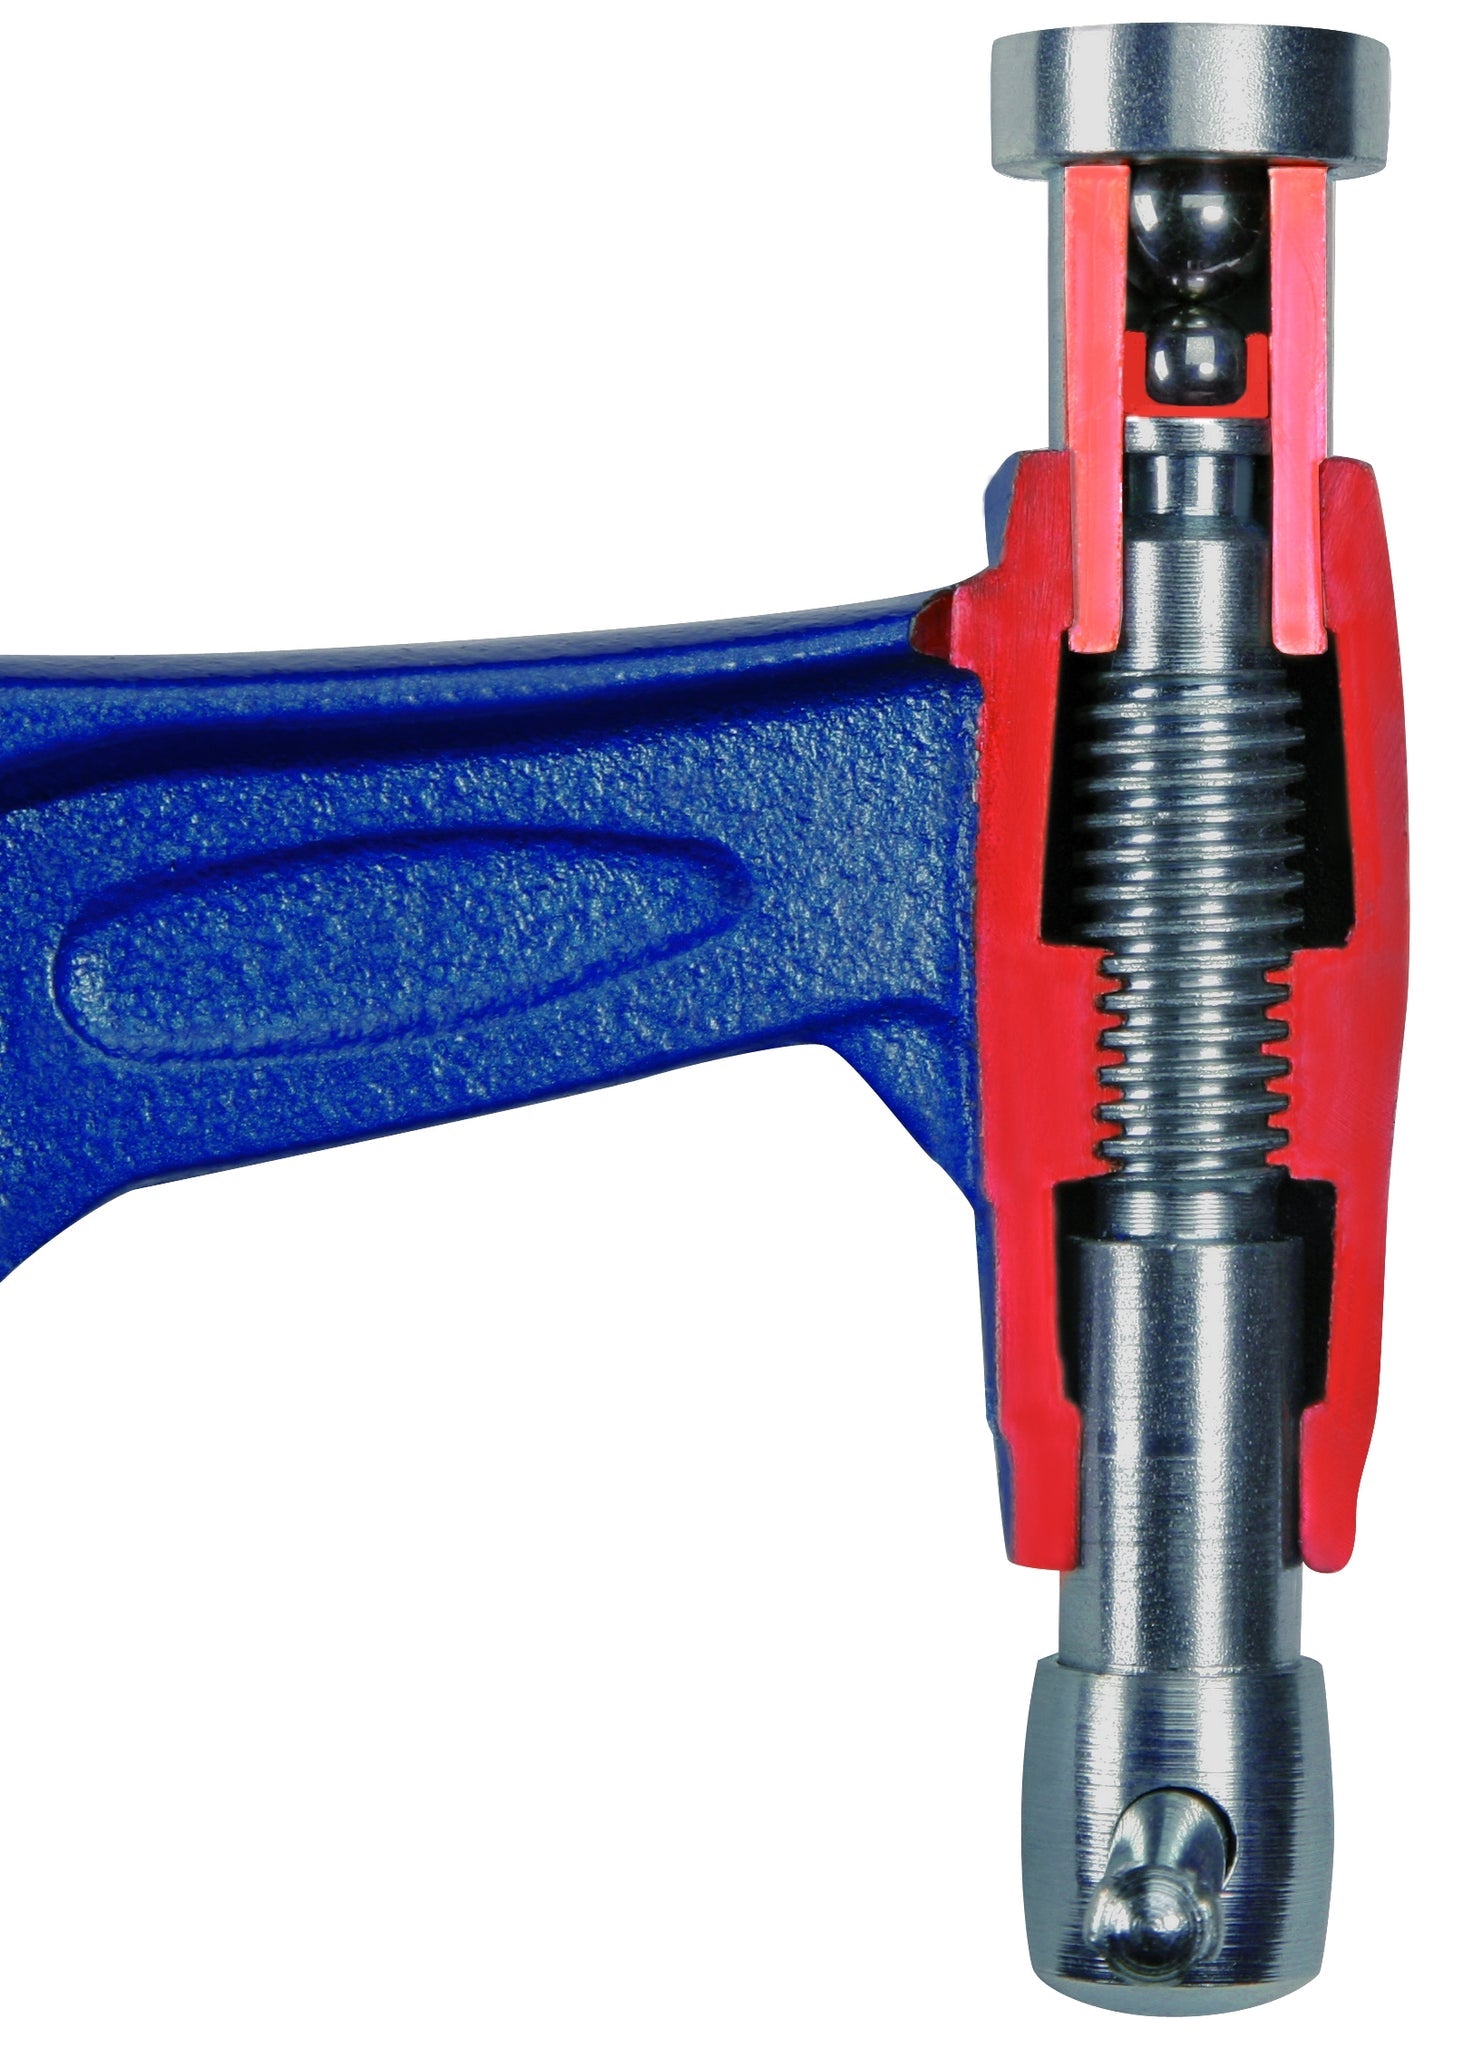 FX Xtreme F Welding Clamps by Excision